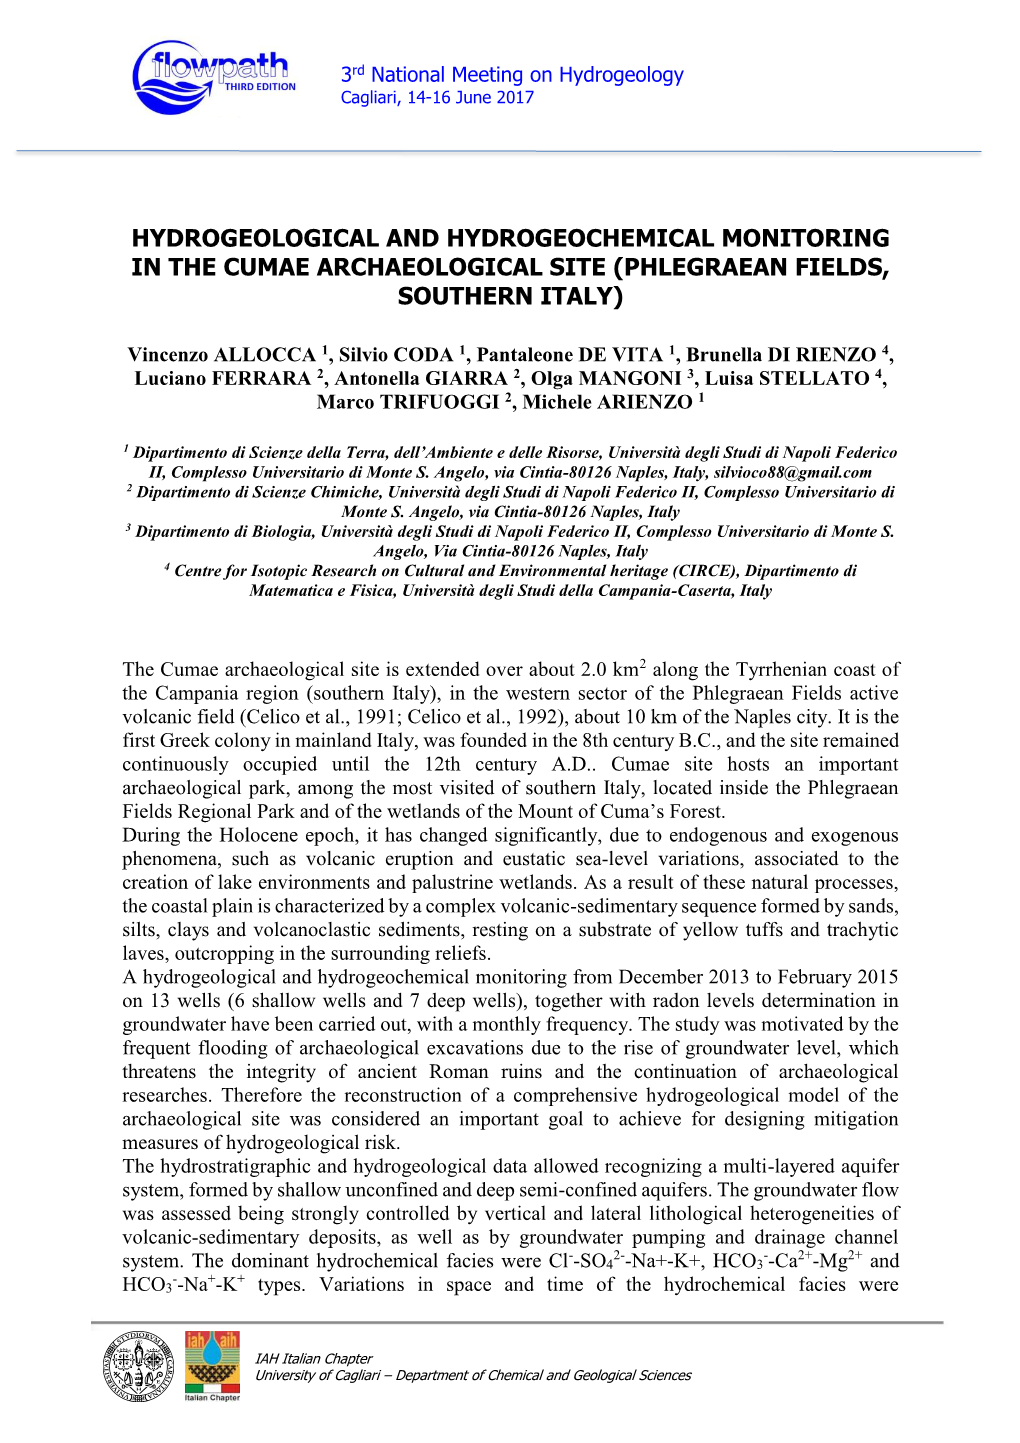 Hydrogeological and Hydrogeochemical Monitoring in the Cumae Archaeological Site (Phlegraean Fields, Southern Italy)